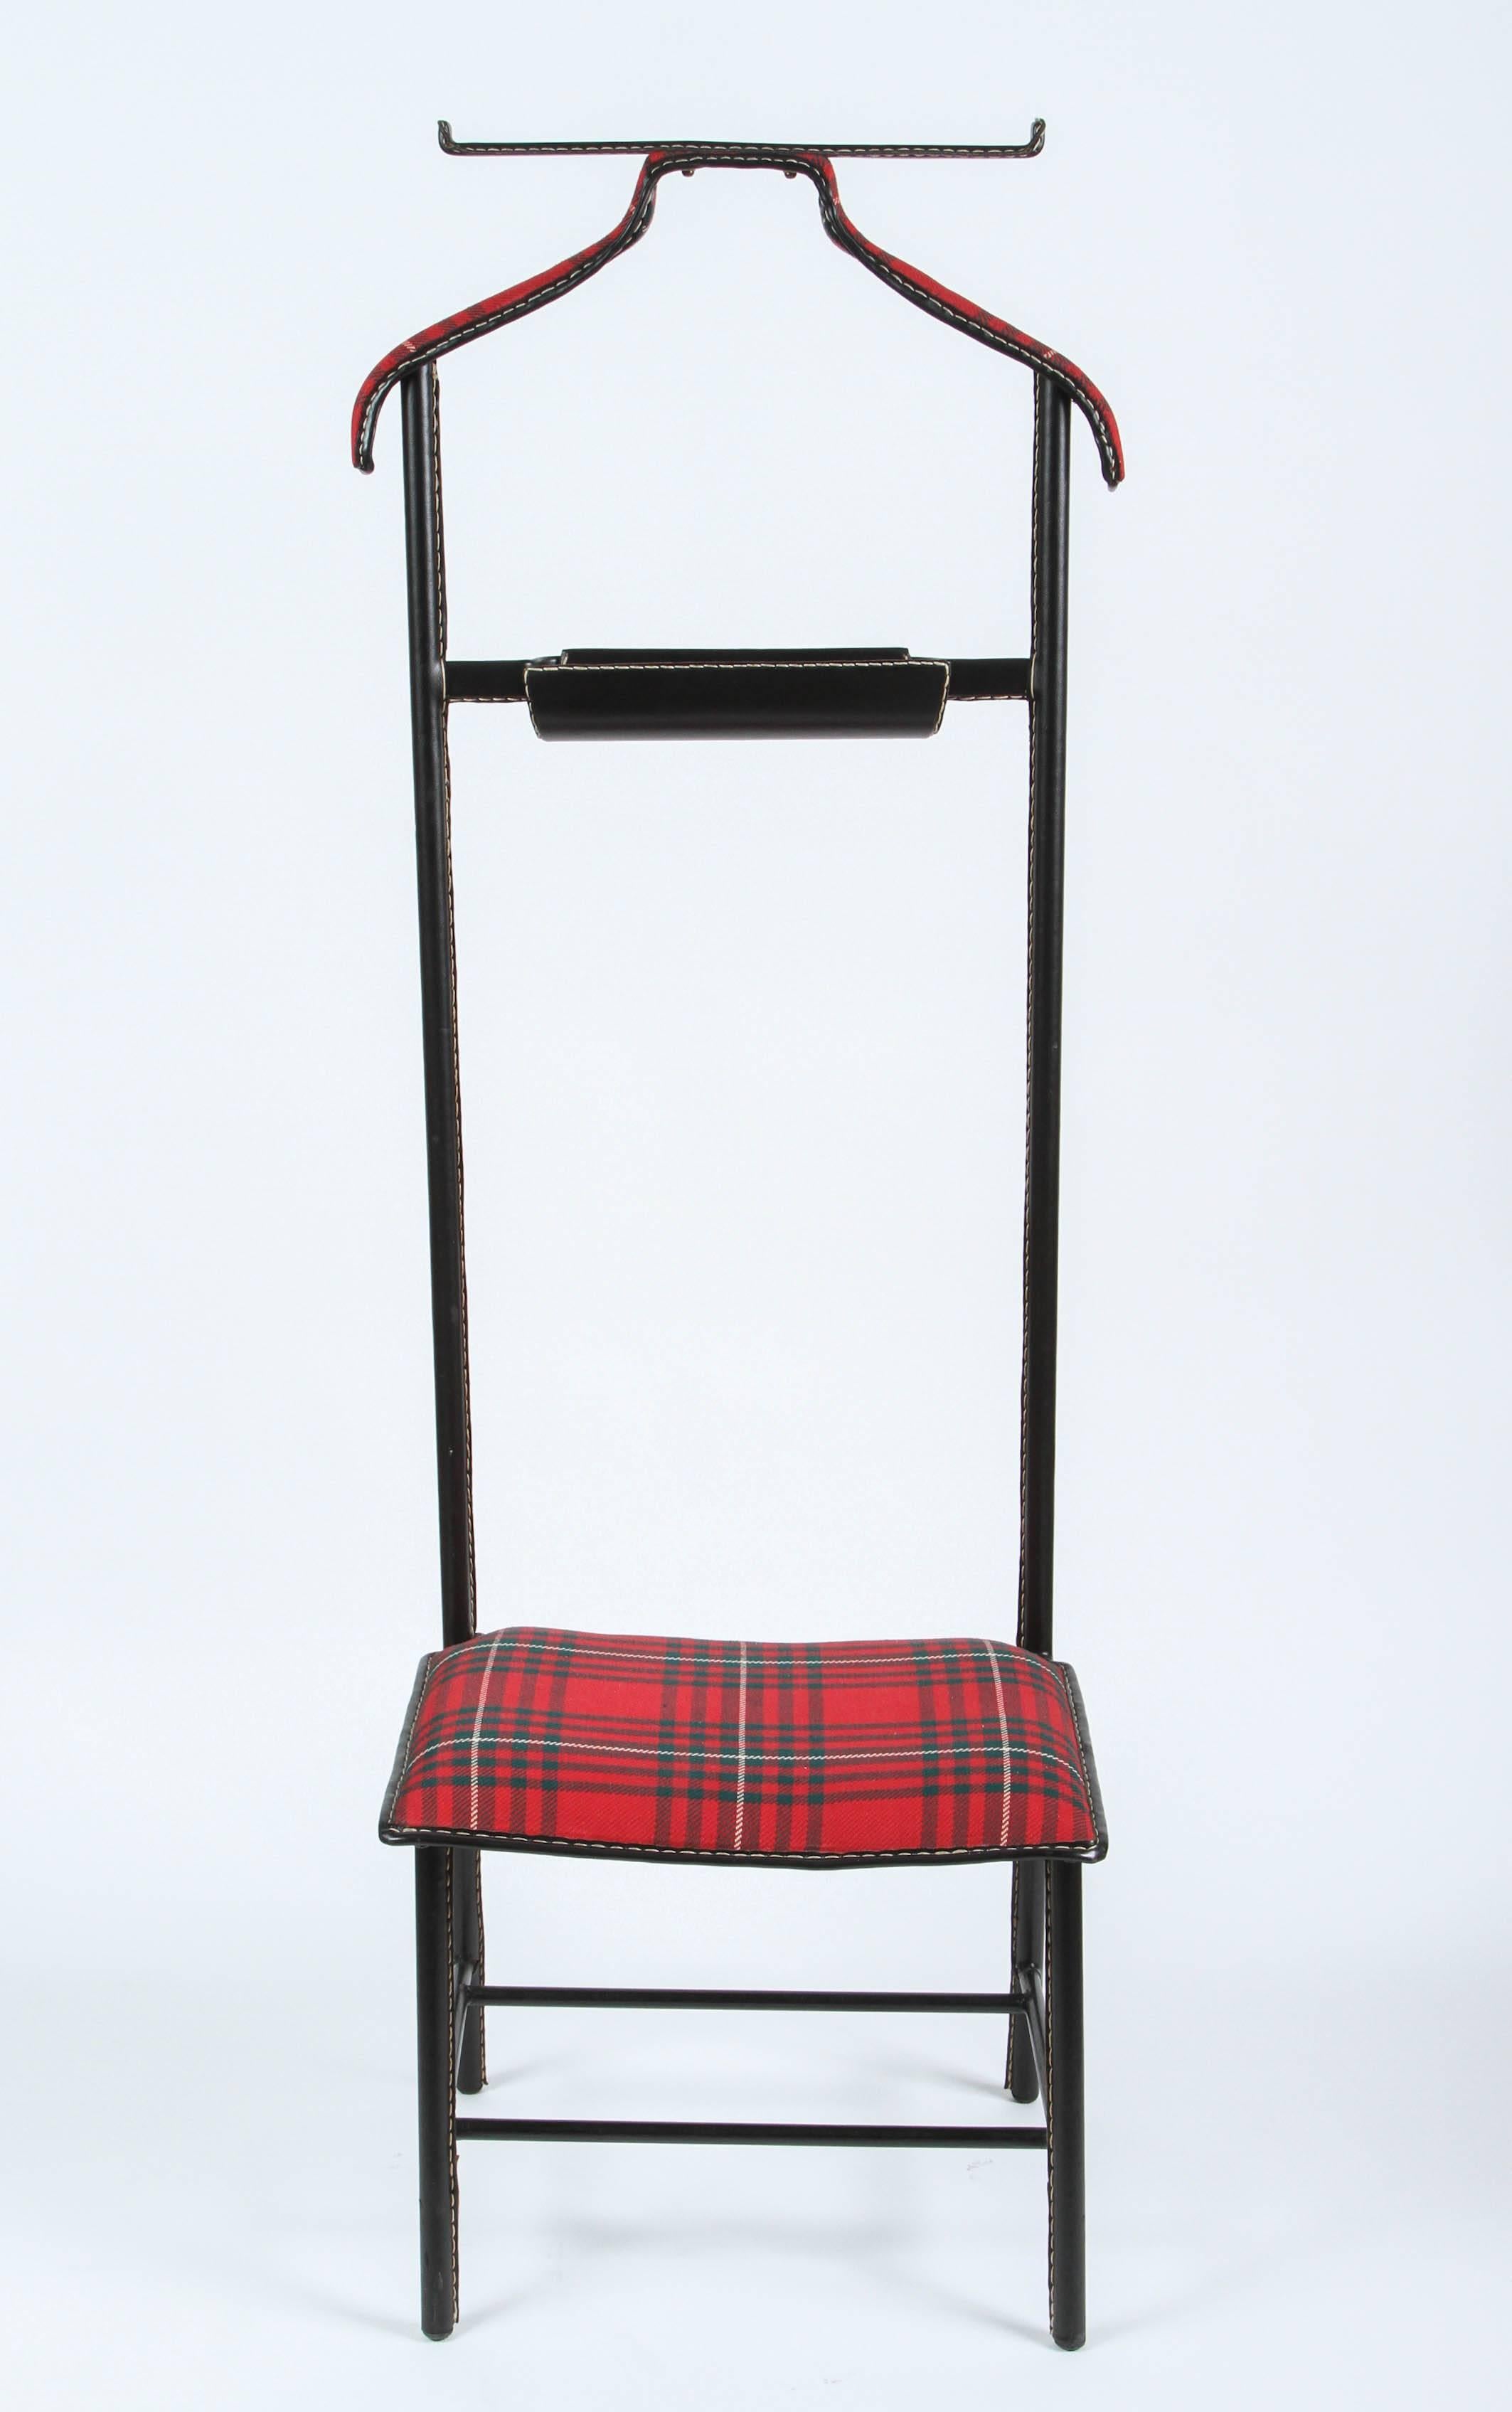 Rare Jacques Adnet for Hermes valet de nuit and seat with leather wrapped hand-stitched in Hermès saddle style and original tartan plaid wool upholstery.
Original Tartan fabric in excellent condition.
Valet features a coat stand, pant hanger, vide